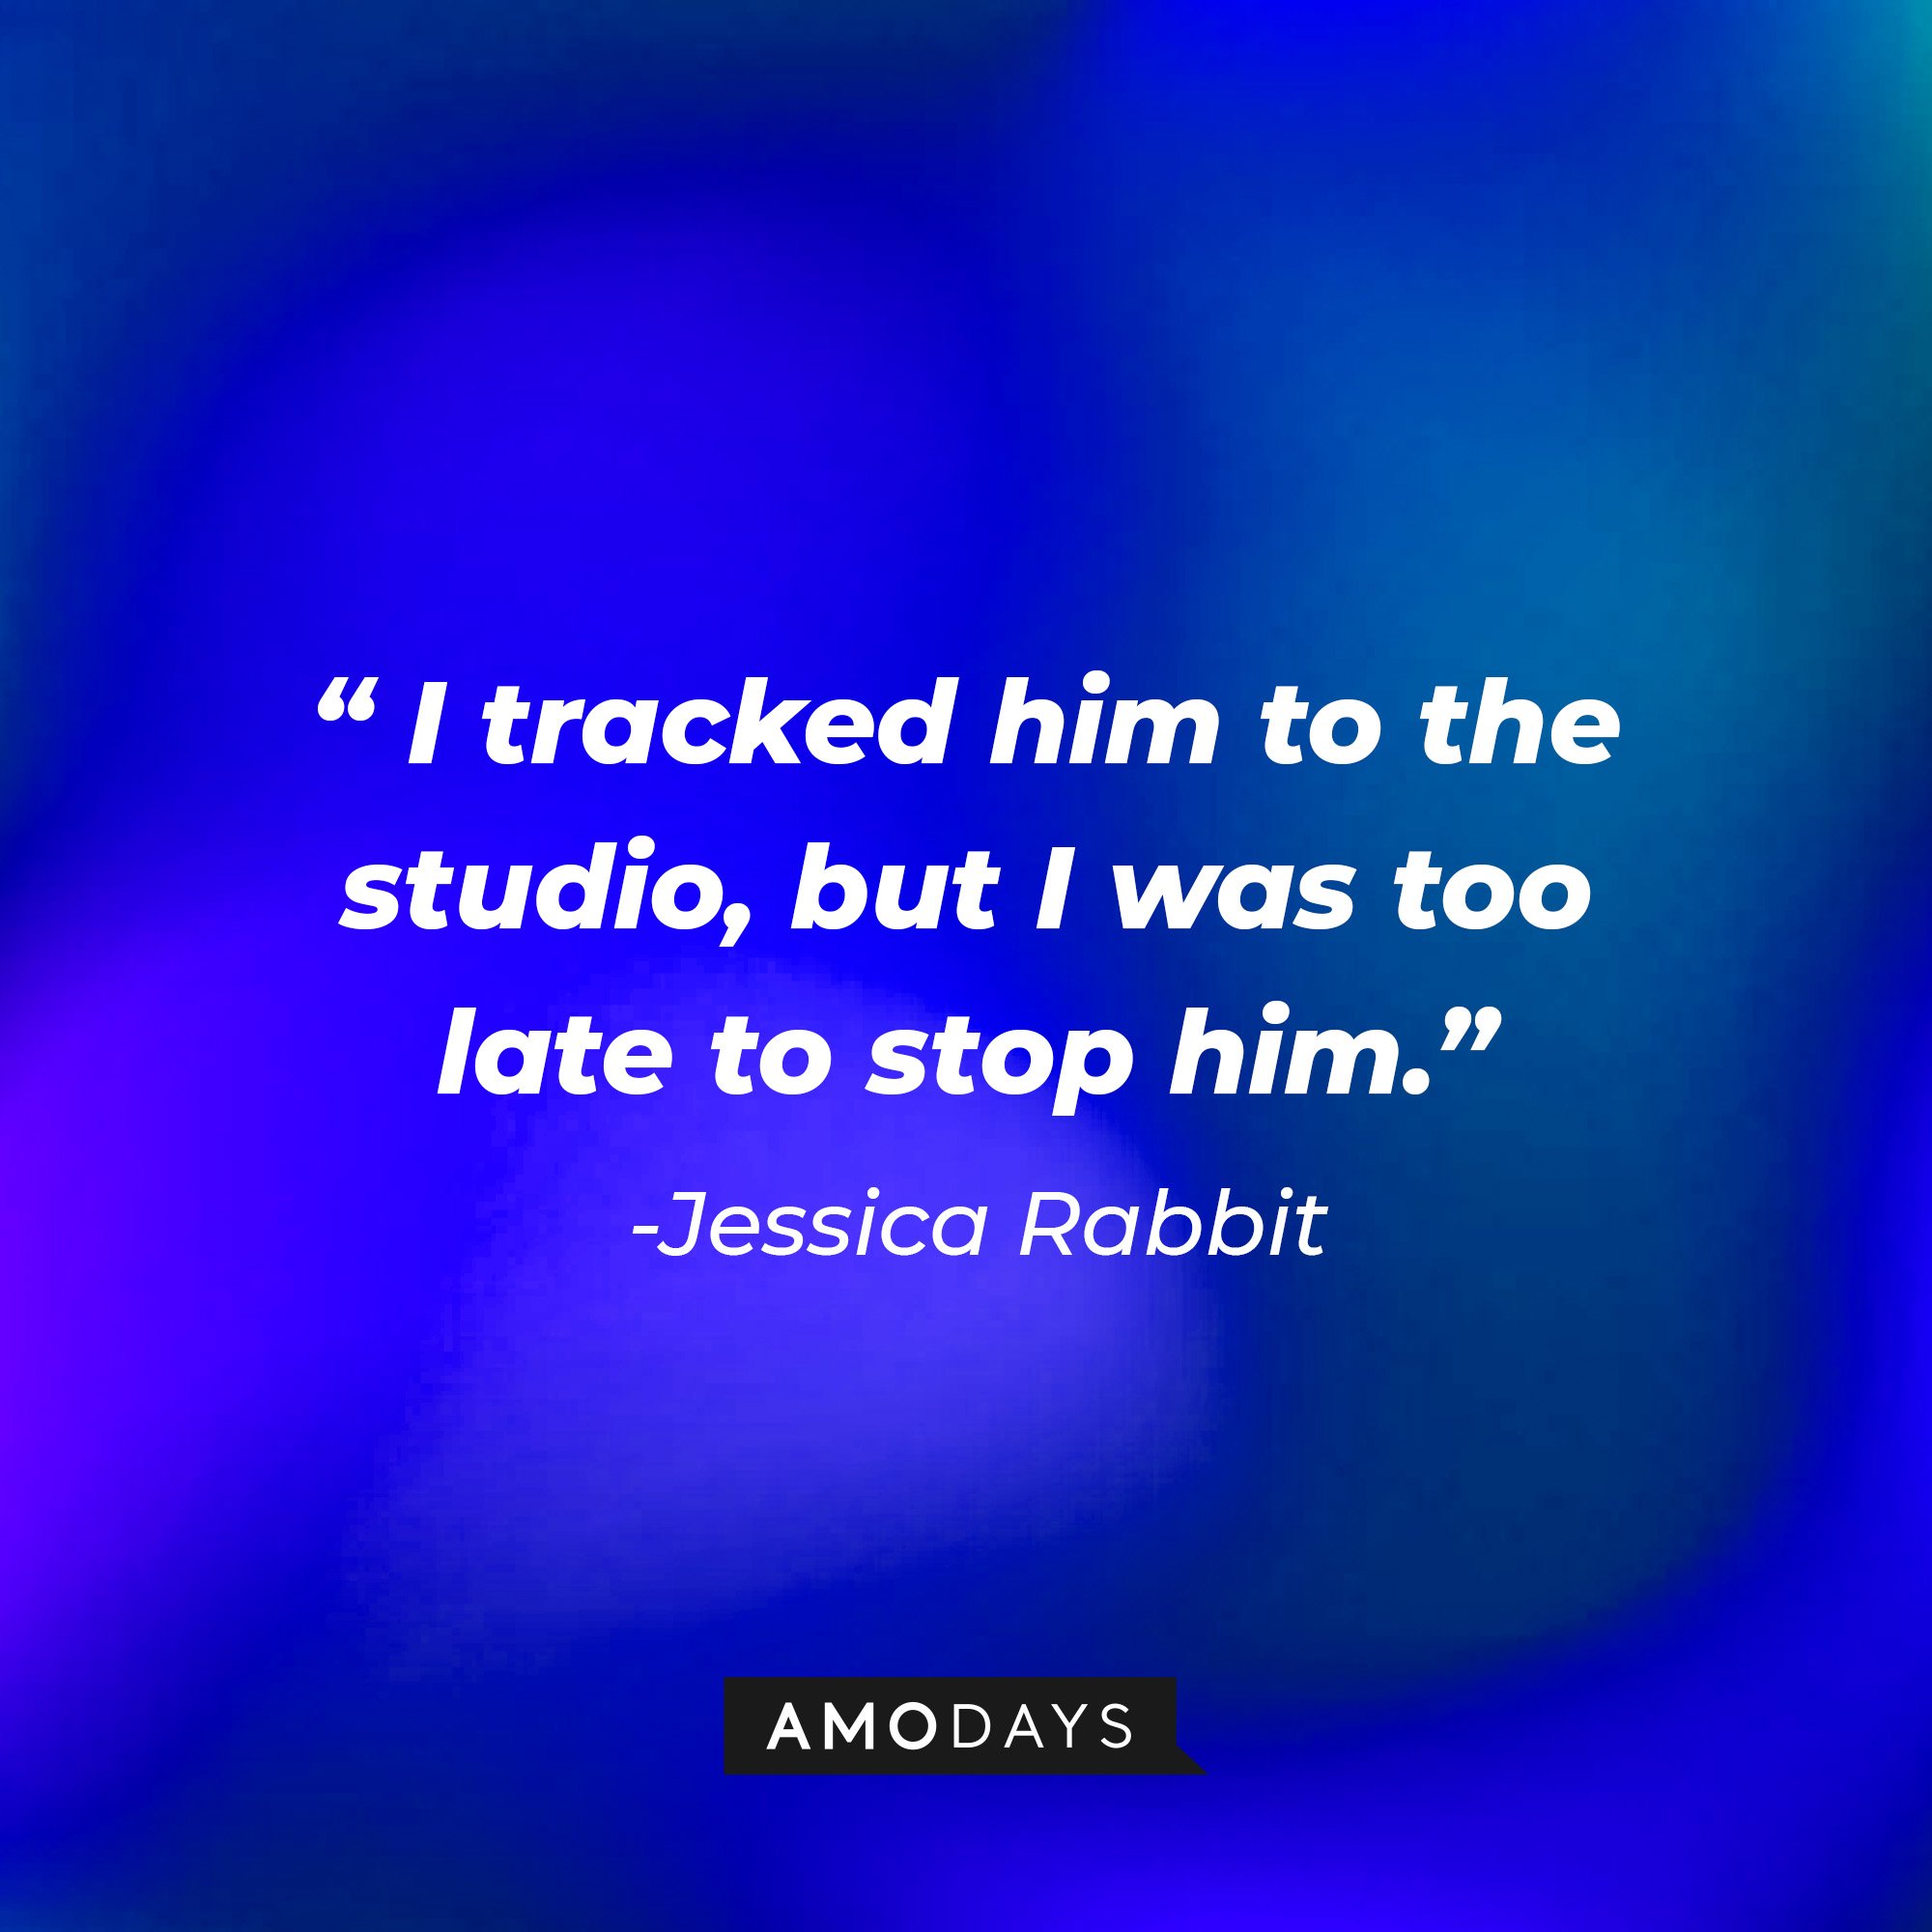 Jessica Rabbit’s quote: “I tracked him to the studio, but I was too late to stop him.” | Image: AmoDays